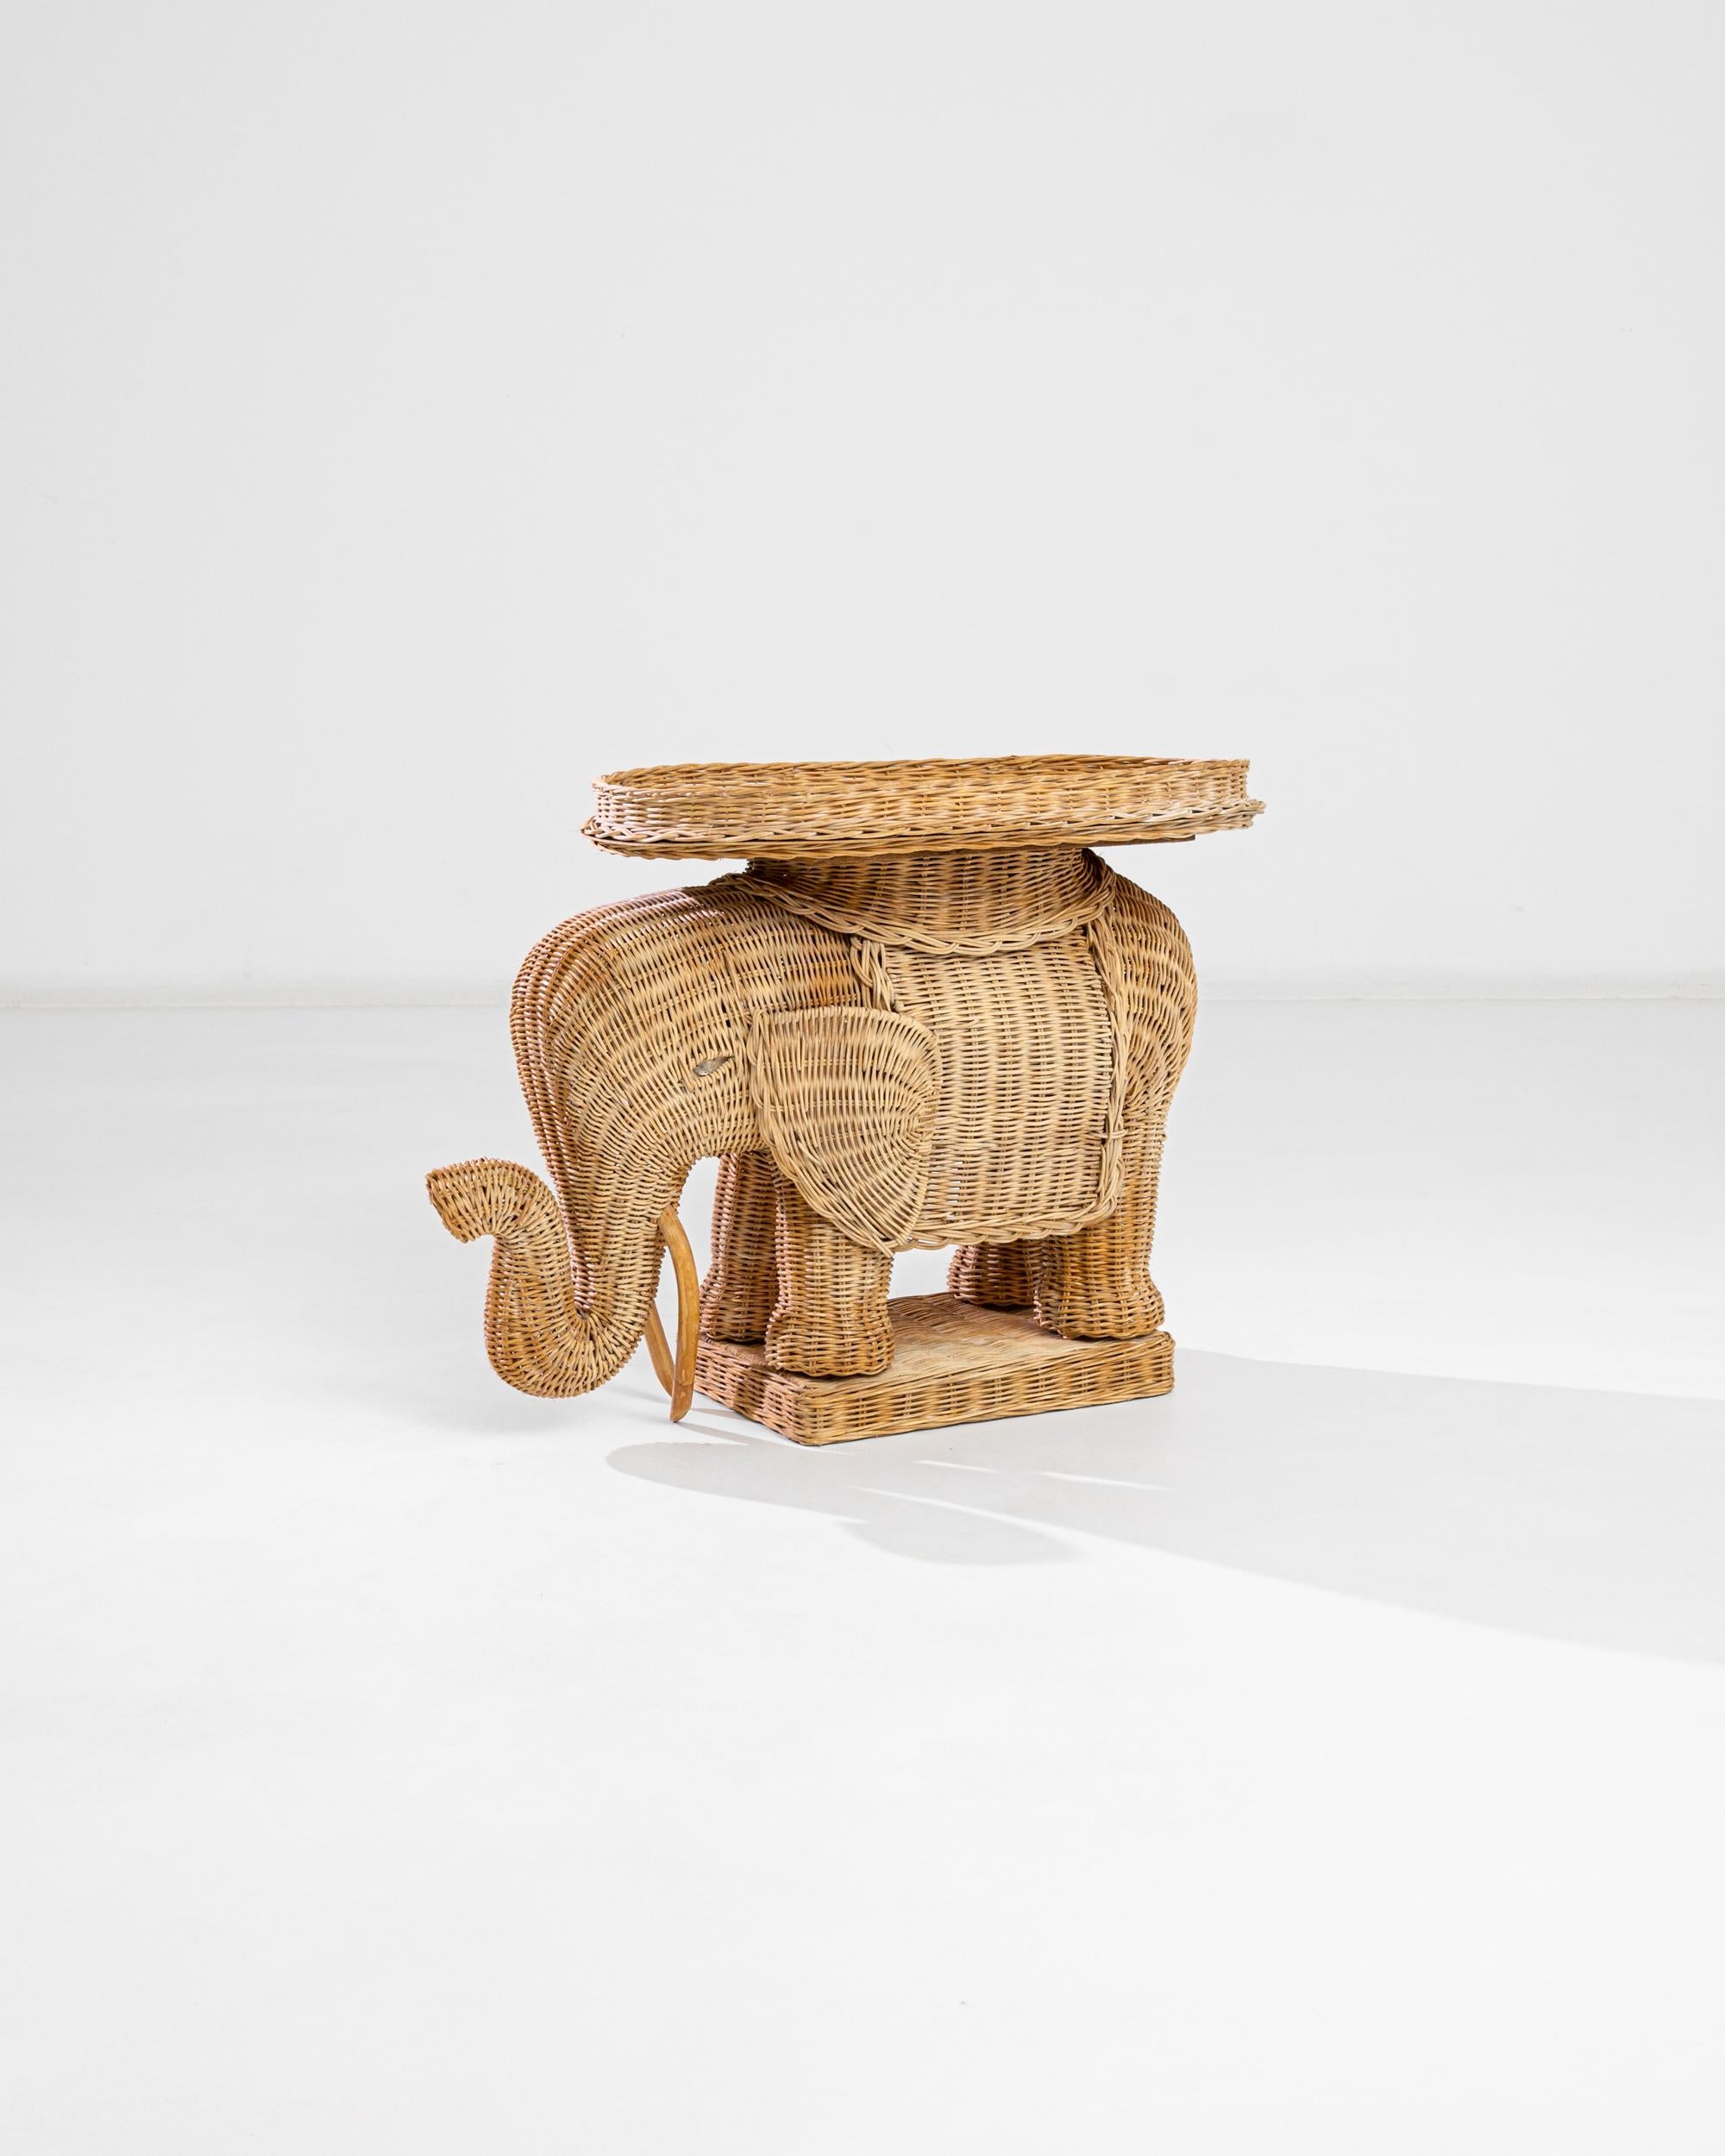 This wicker elephant provides a truly original accent. Made in 1960s France, beautiful craftsmanship is matched only by the imaginative flair of the artisan — the fine weave of the wicker expresses every sinuous curves of the elephant’s form. A